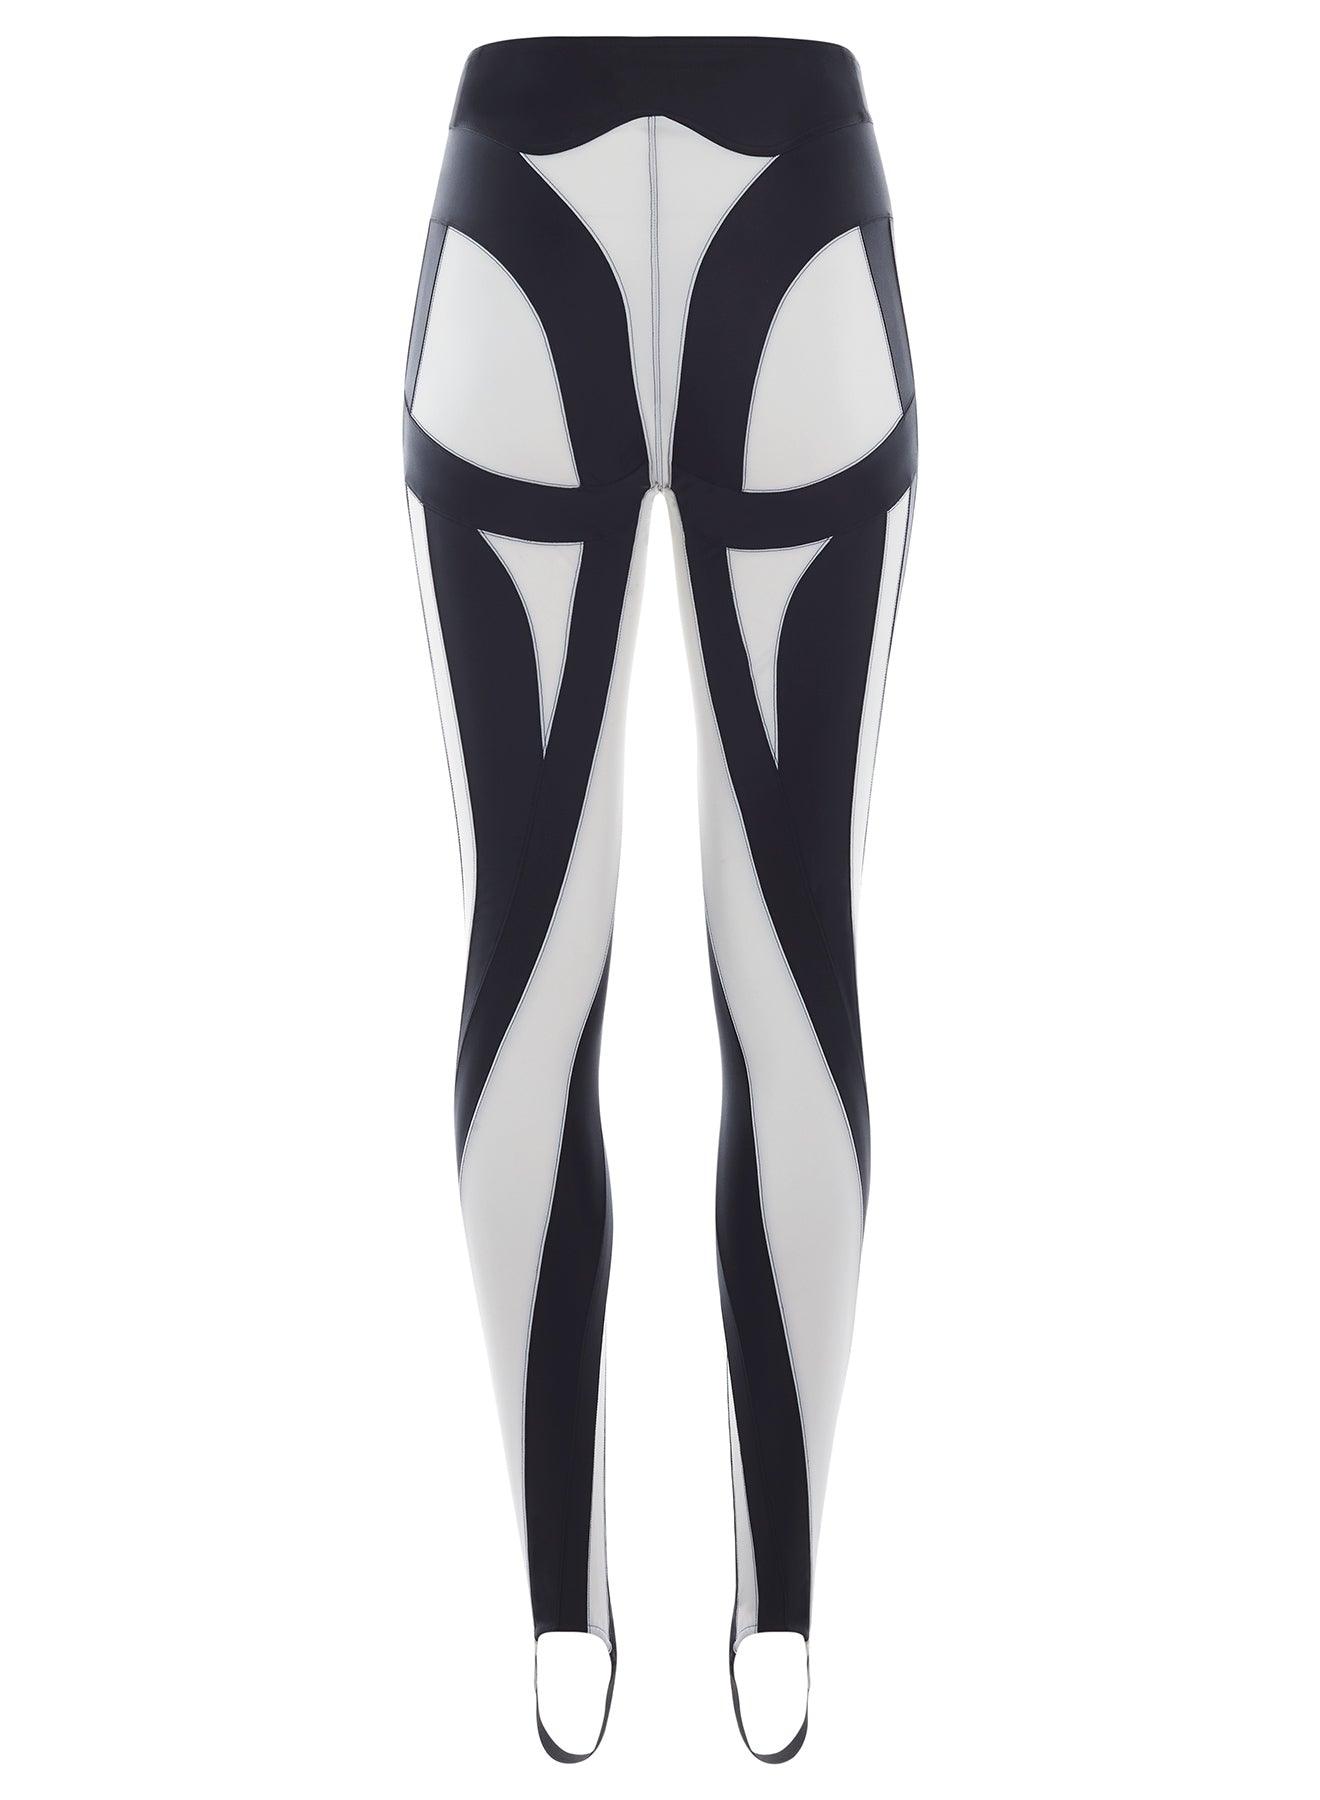 mugler Spiral leggings with inserts available on